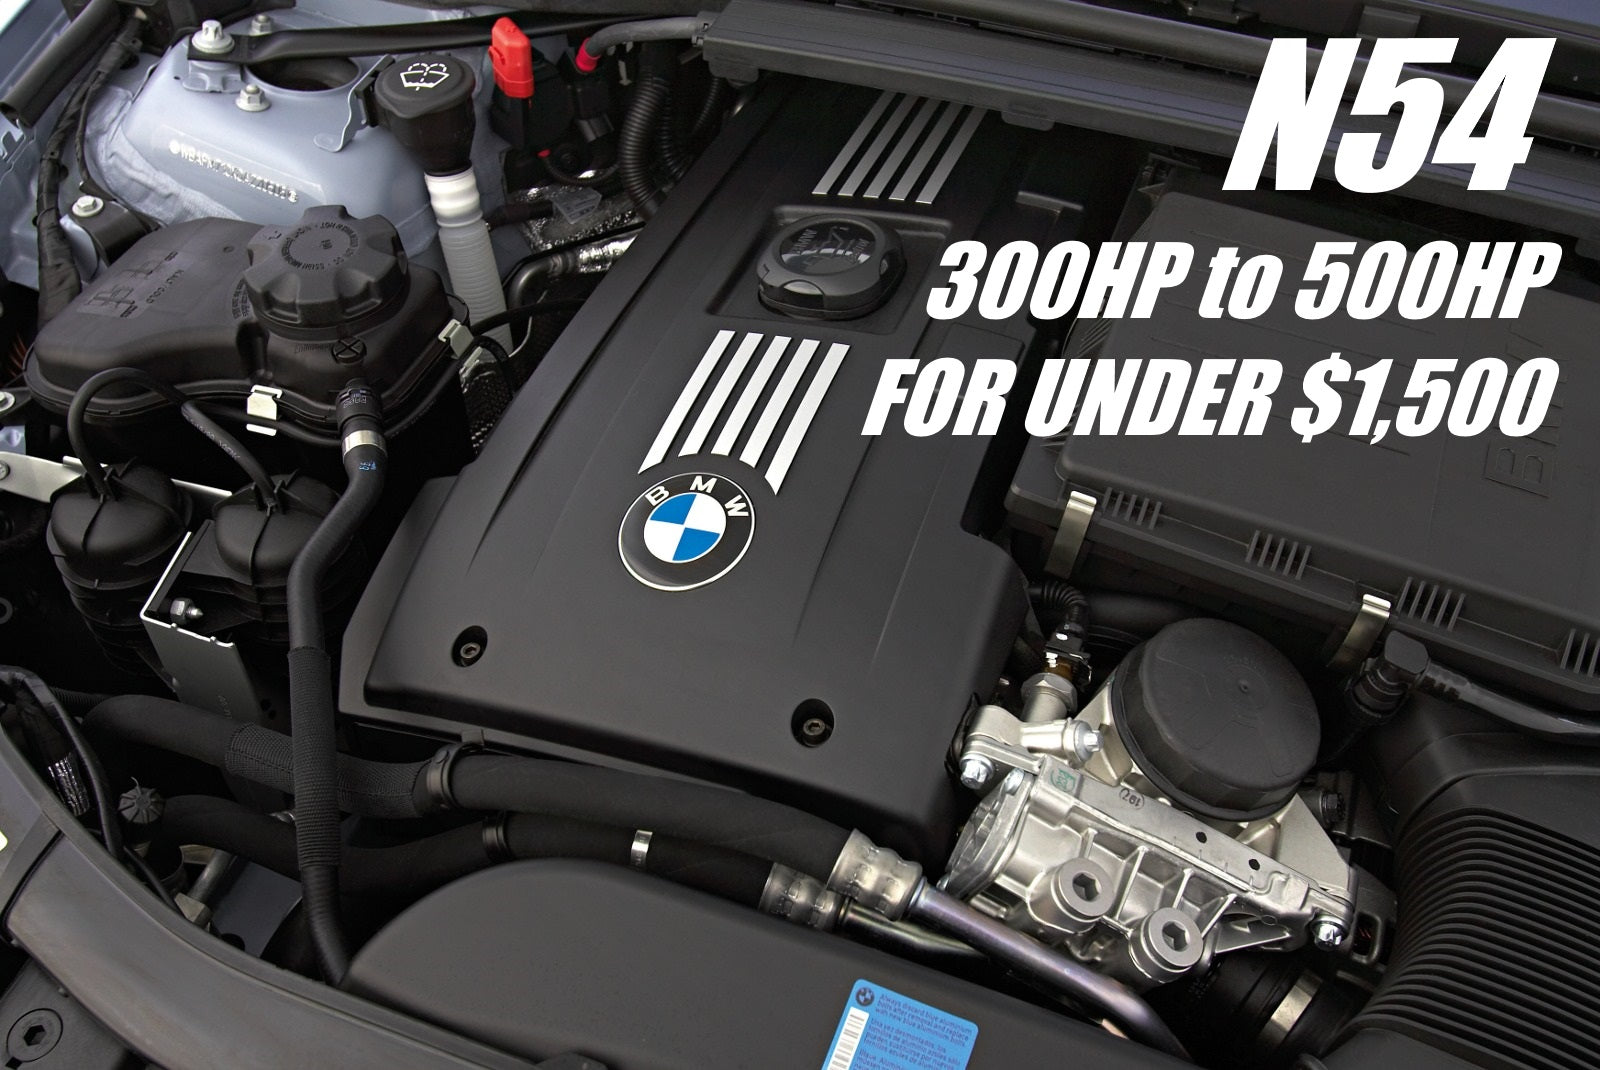 GIVE YOUR N54 BMW 135i or 335i 500HP FOR UNDER $1,500